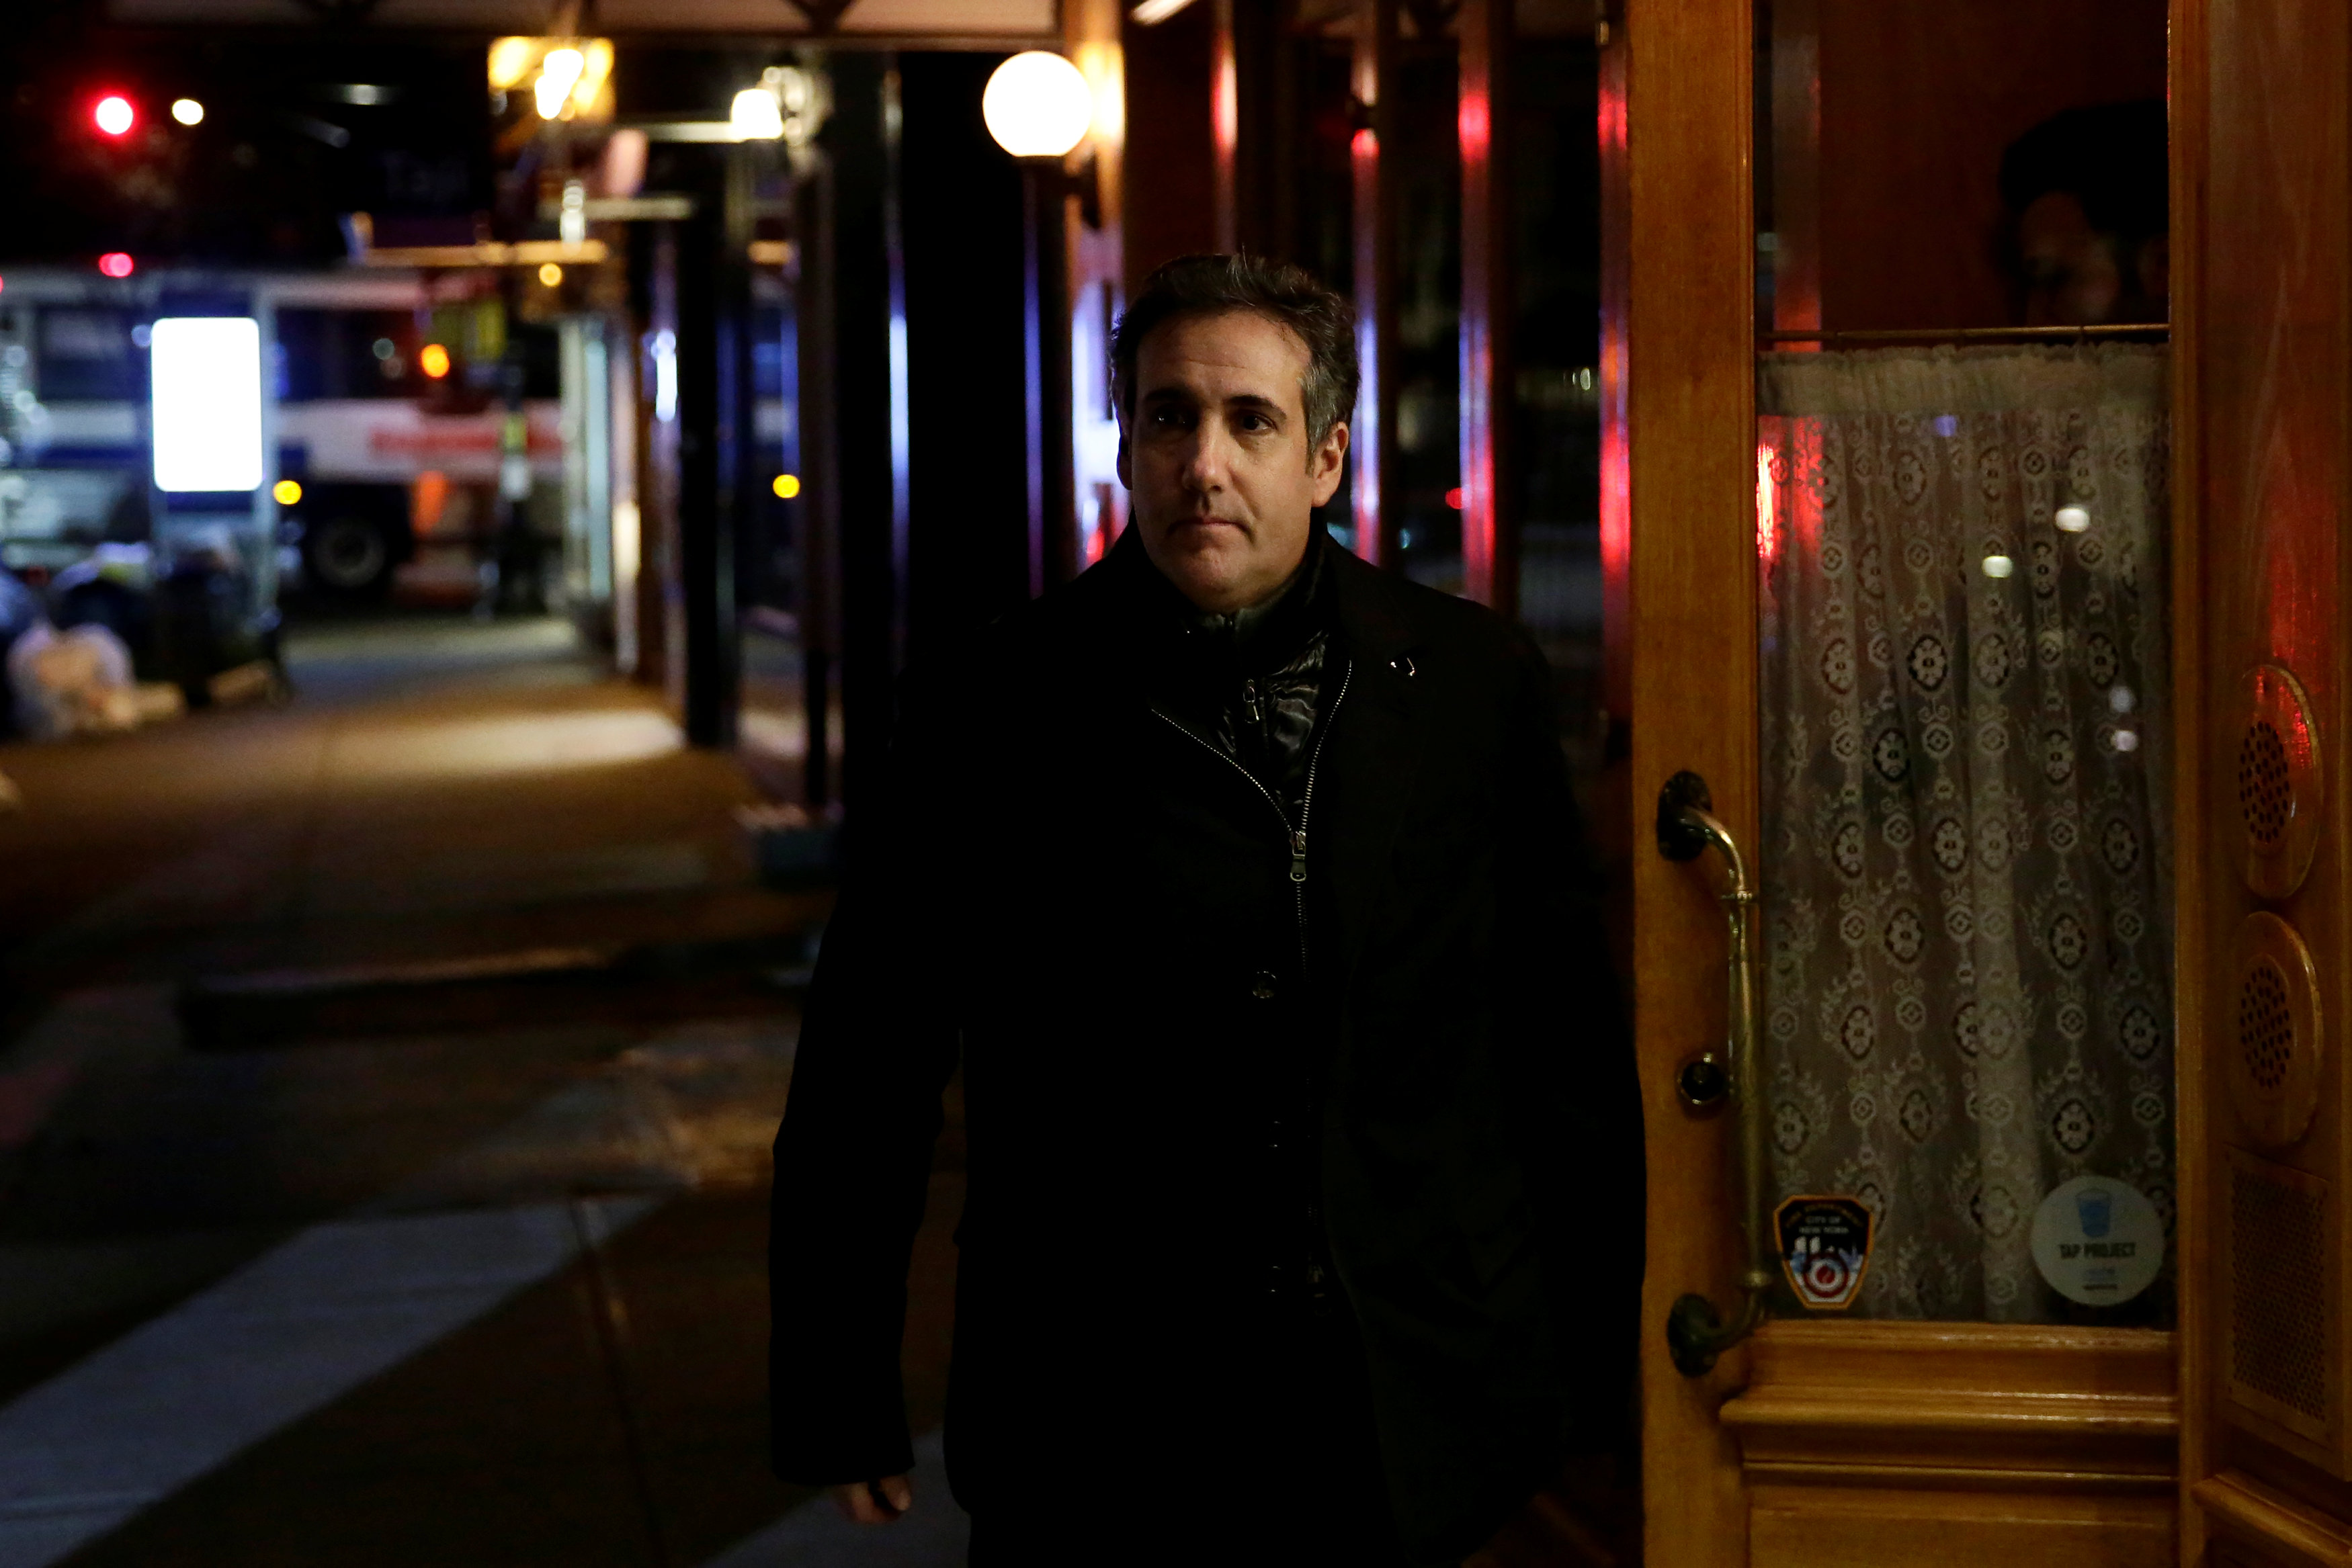 U.S. President Donald Trump's personal lawyer Michael Cohen is pictured leaving a restaurant in the Manhattan borough of New York City, New York, U.S., April 10, 2018. REUTERS/Amir Levy